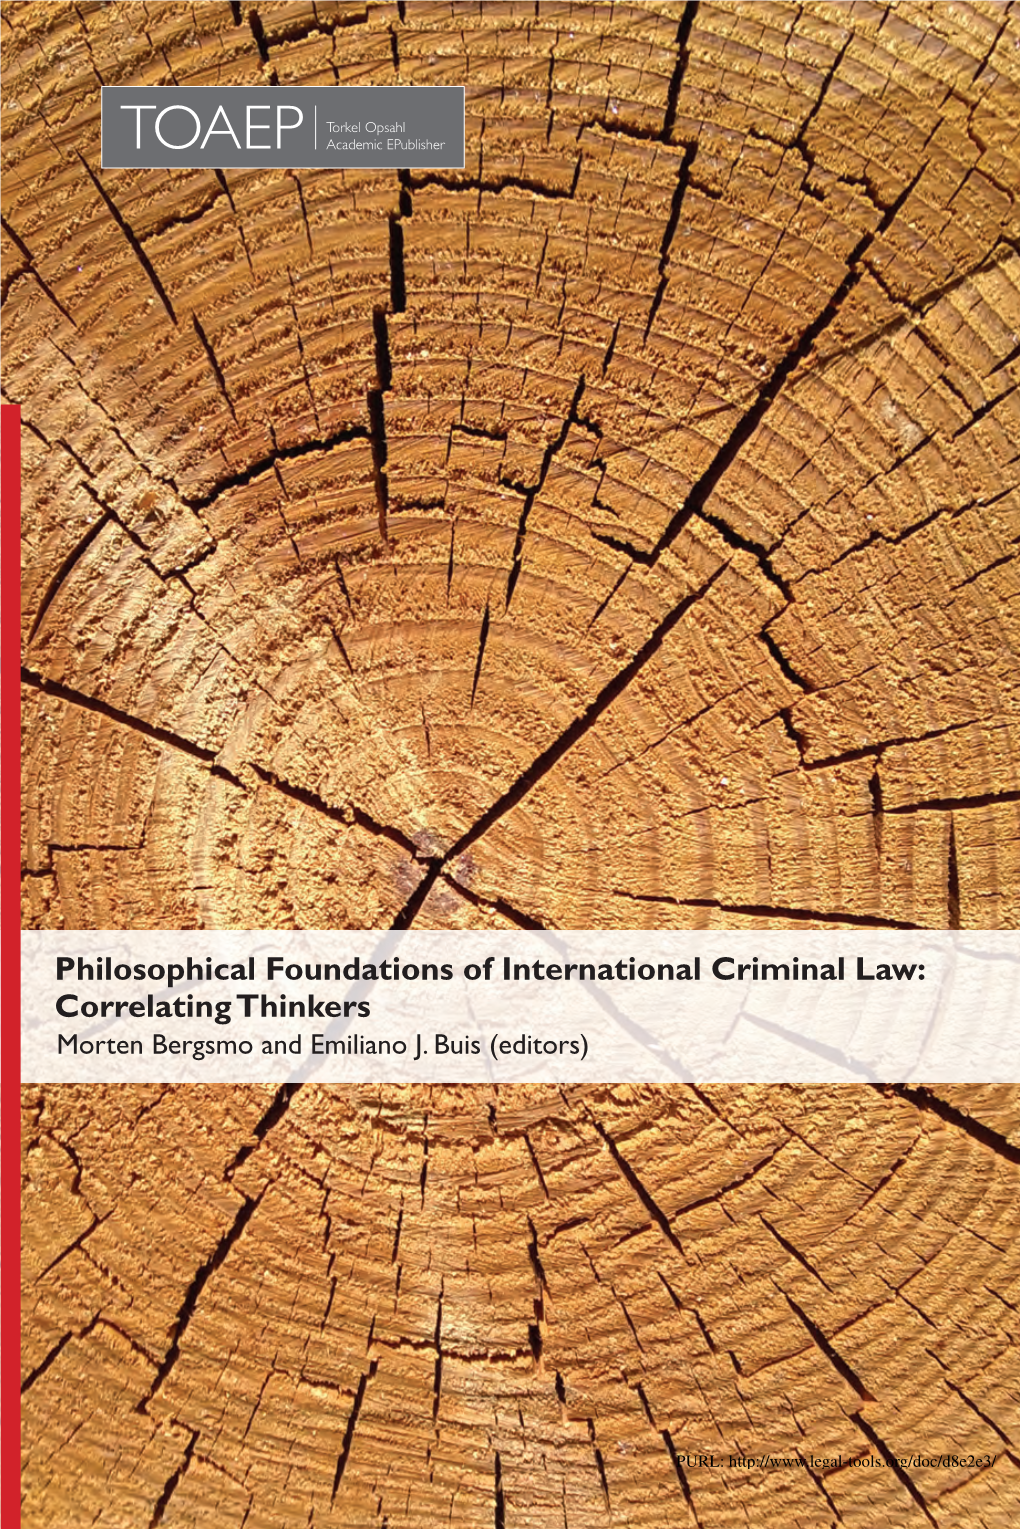 Inter Homines Esse: the Foundations of International Crimi-Nal Law And